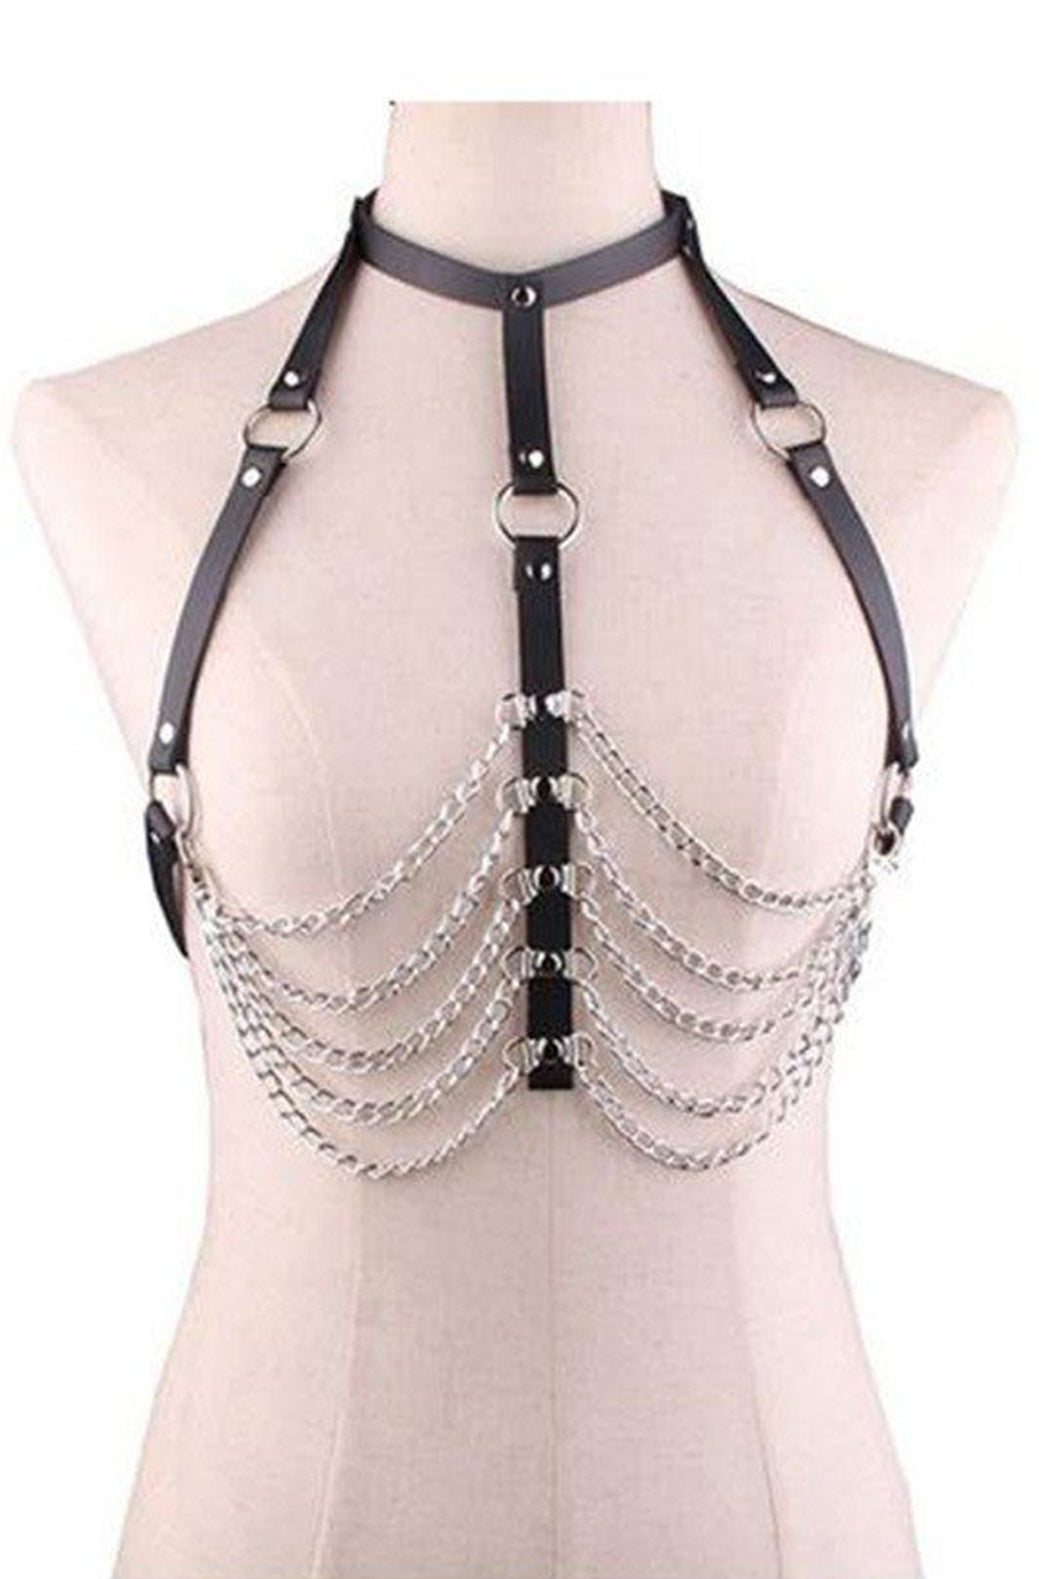 Body Harness with Low Chest Chains